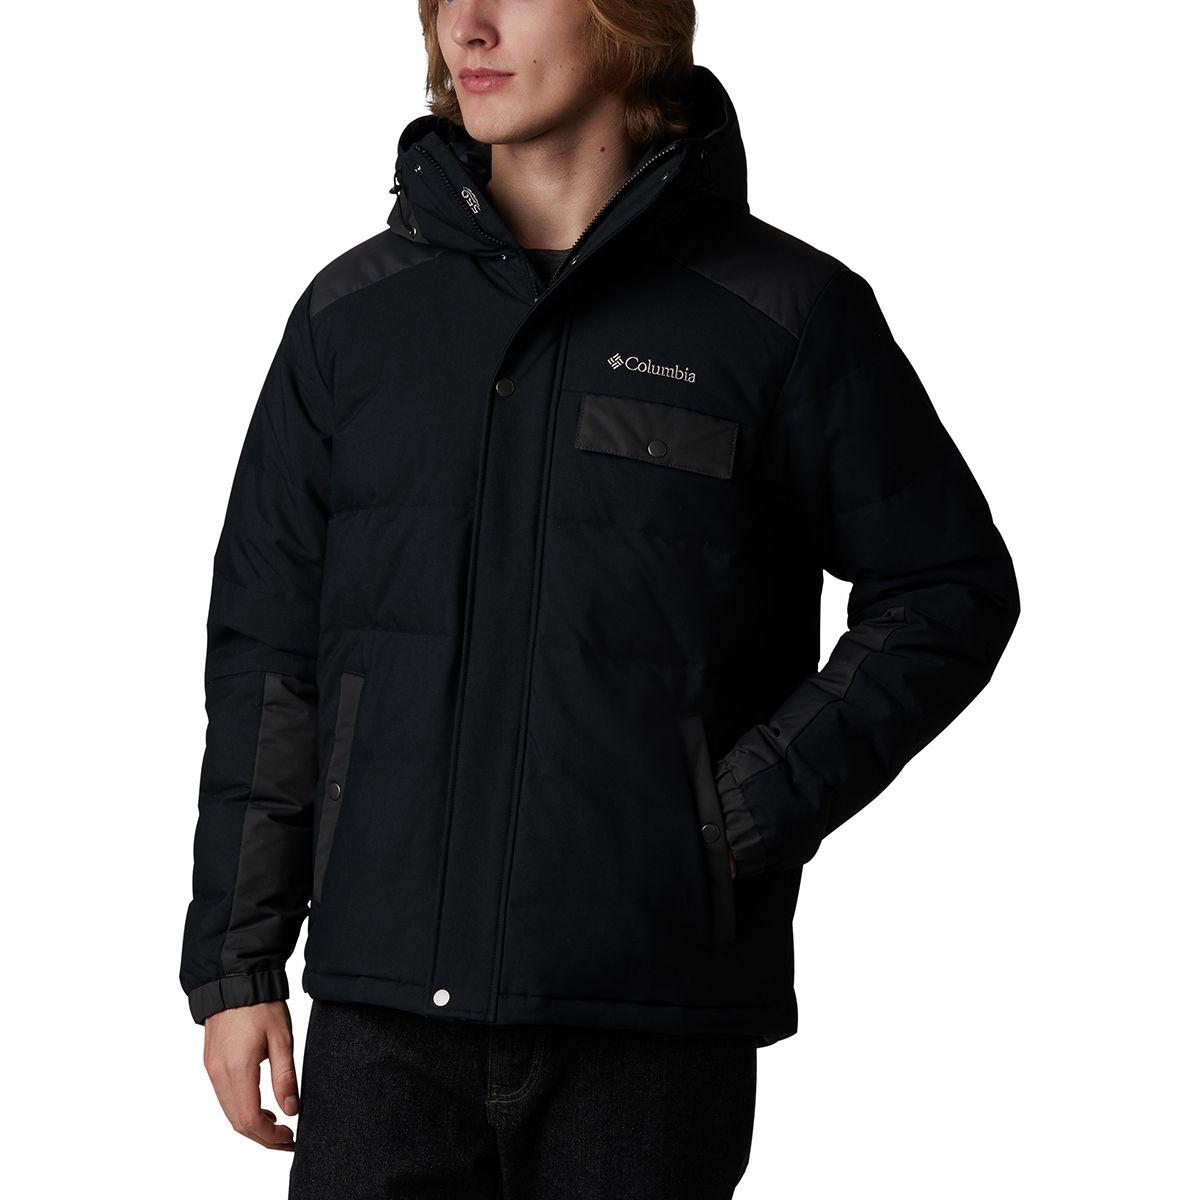 Columbia Synthetic Winter Challenger Hooded Jacket in Black for Men - Lyst